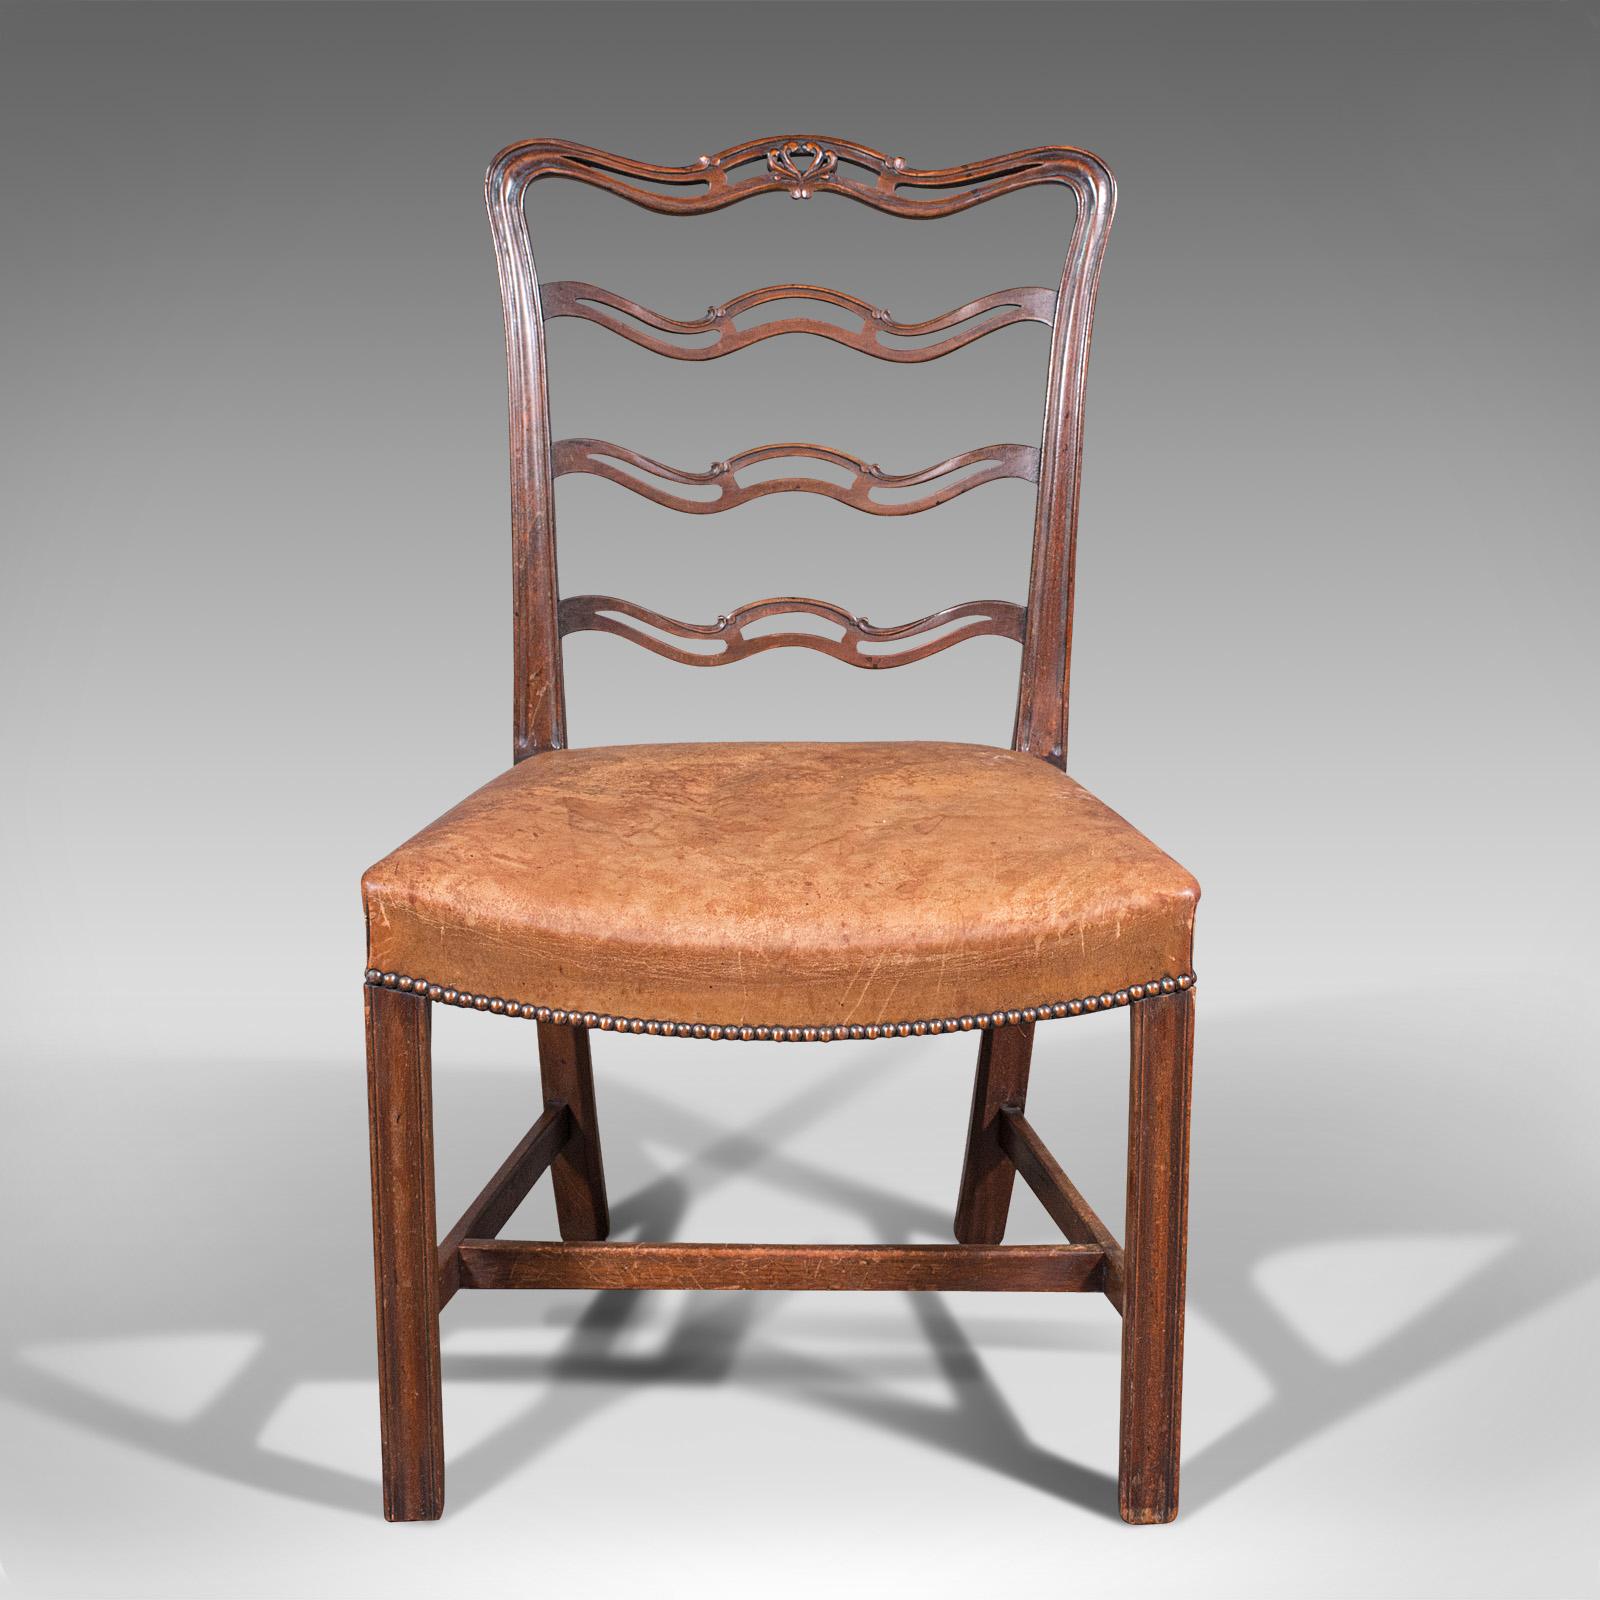 Wood Set of 4 Vintage Ladder Back Chairs, Irish, Carver, Seat, Art Deco, Circa 1940 For Sale